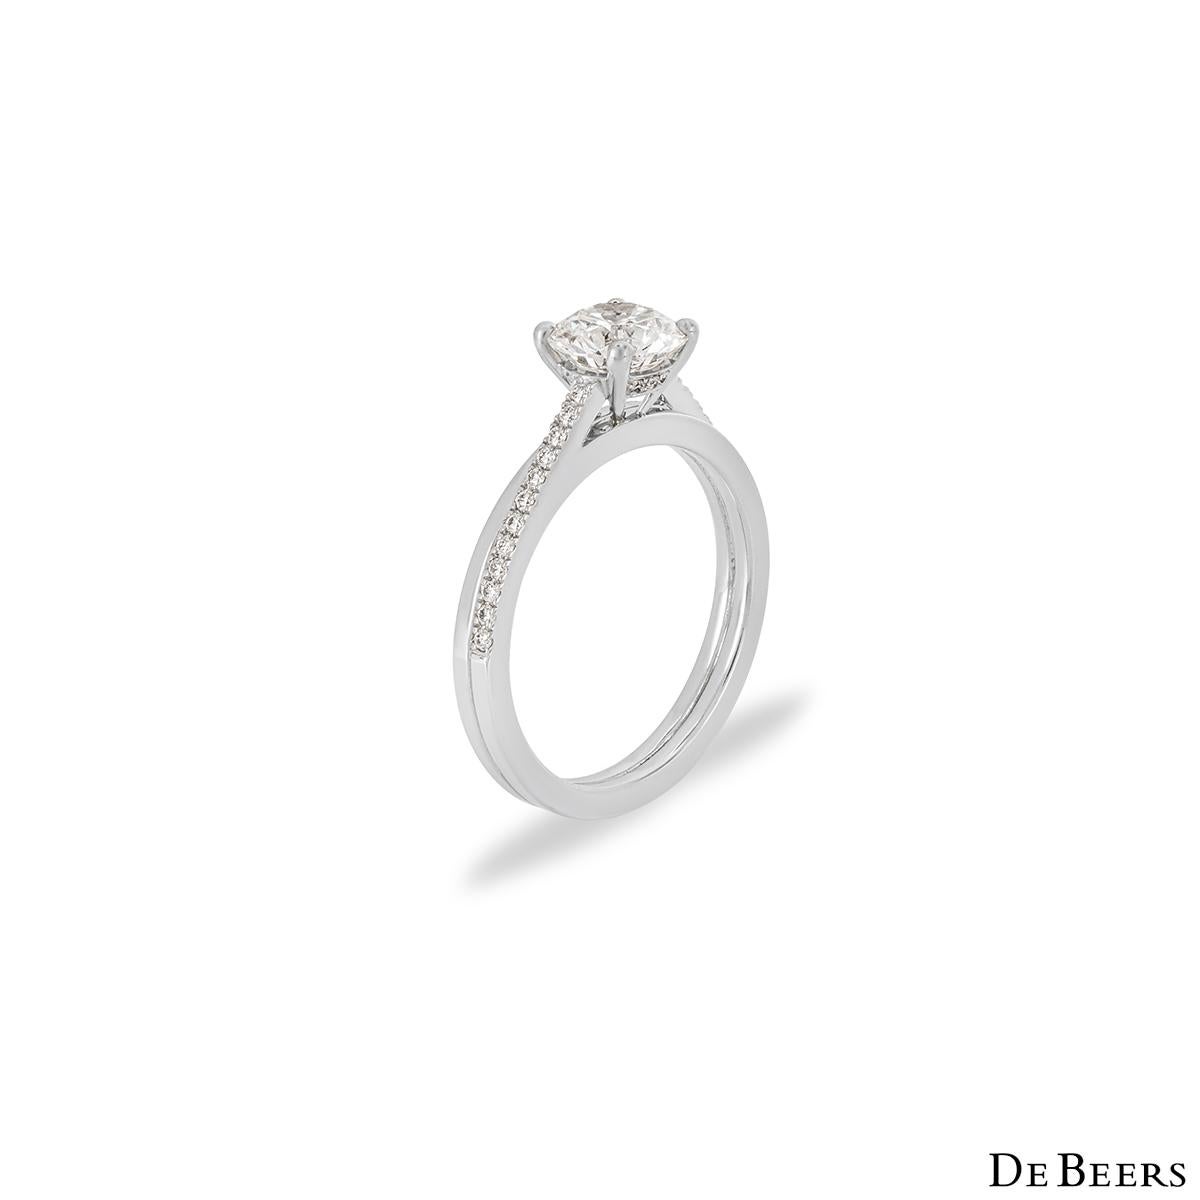 A captivating platinum diamond ring from The Promise collection by De Beers. The ring is set to the centre with a round brilliant cut diamond weighing 1.14ct, F colour and IF clarity (Internally Flawless). The shoulders of the ring are made up of a